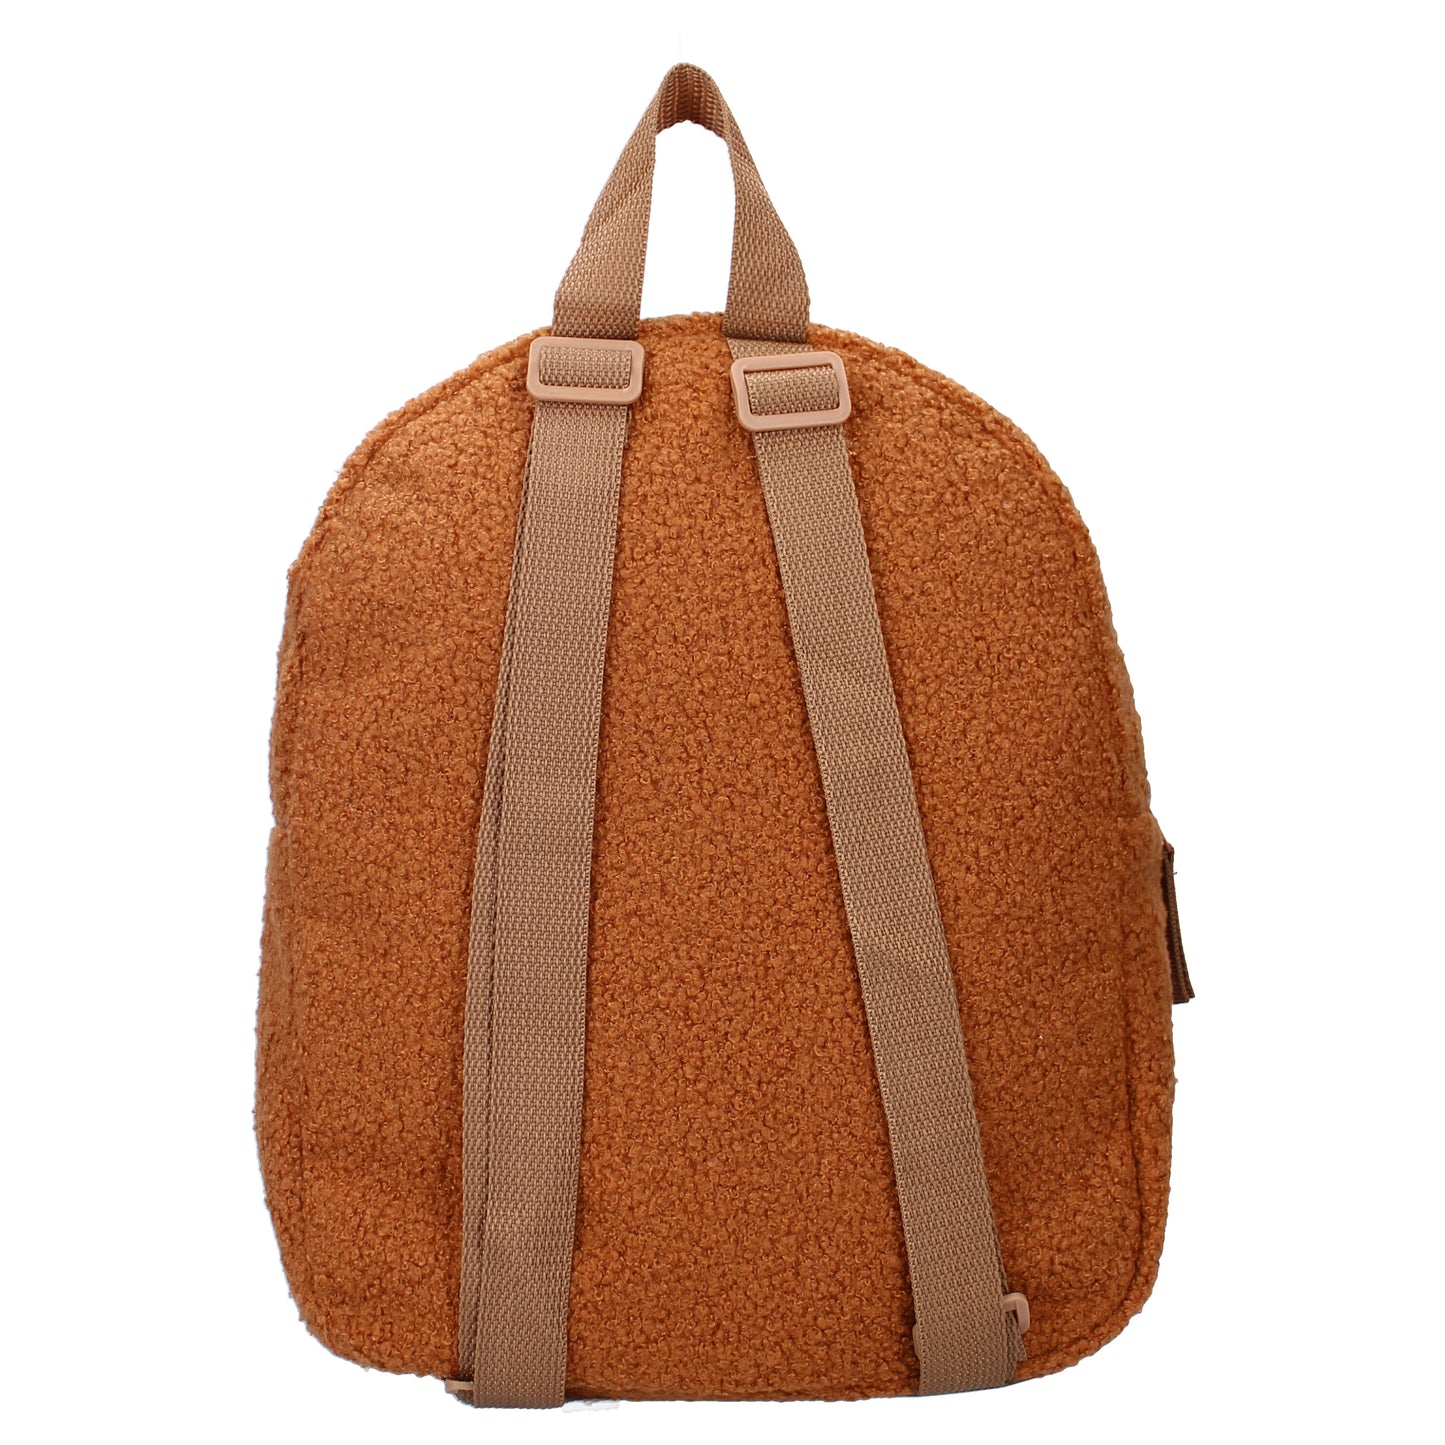 Brown - Buddies For Life | Mini Backpack | Kid’s Backpack for Creche, Nursery & School